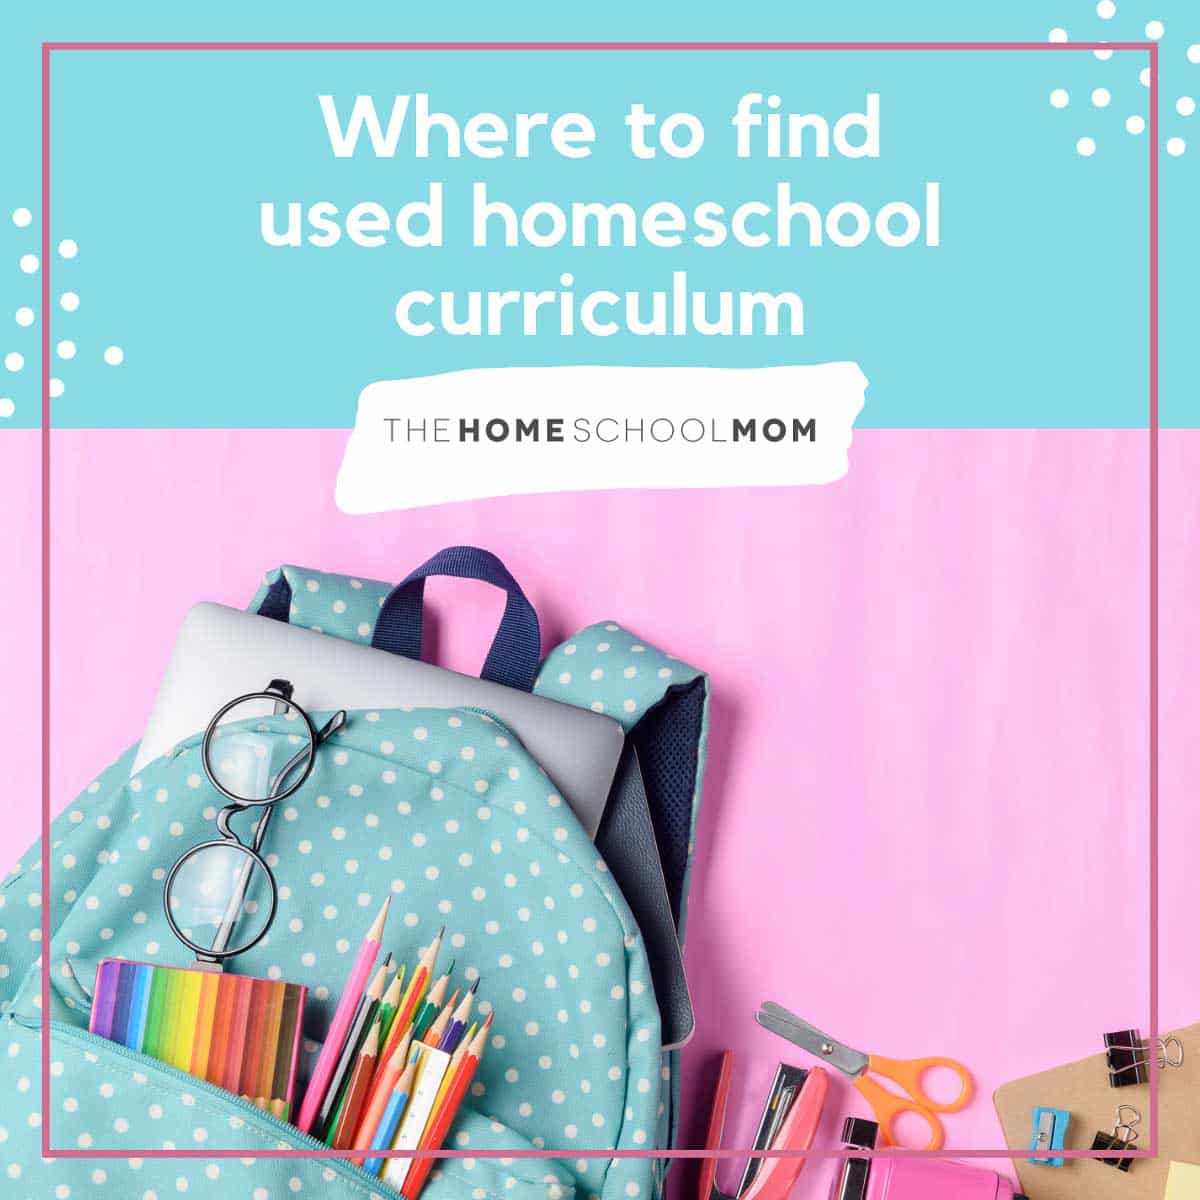 Where to find used homeschool curriculum.